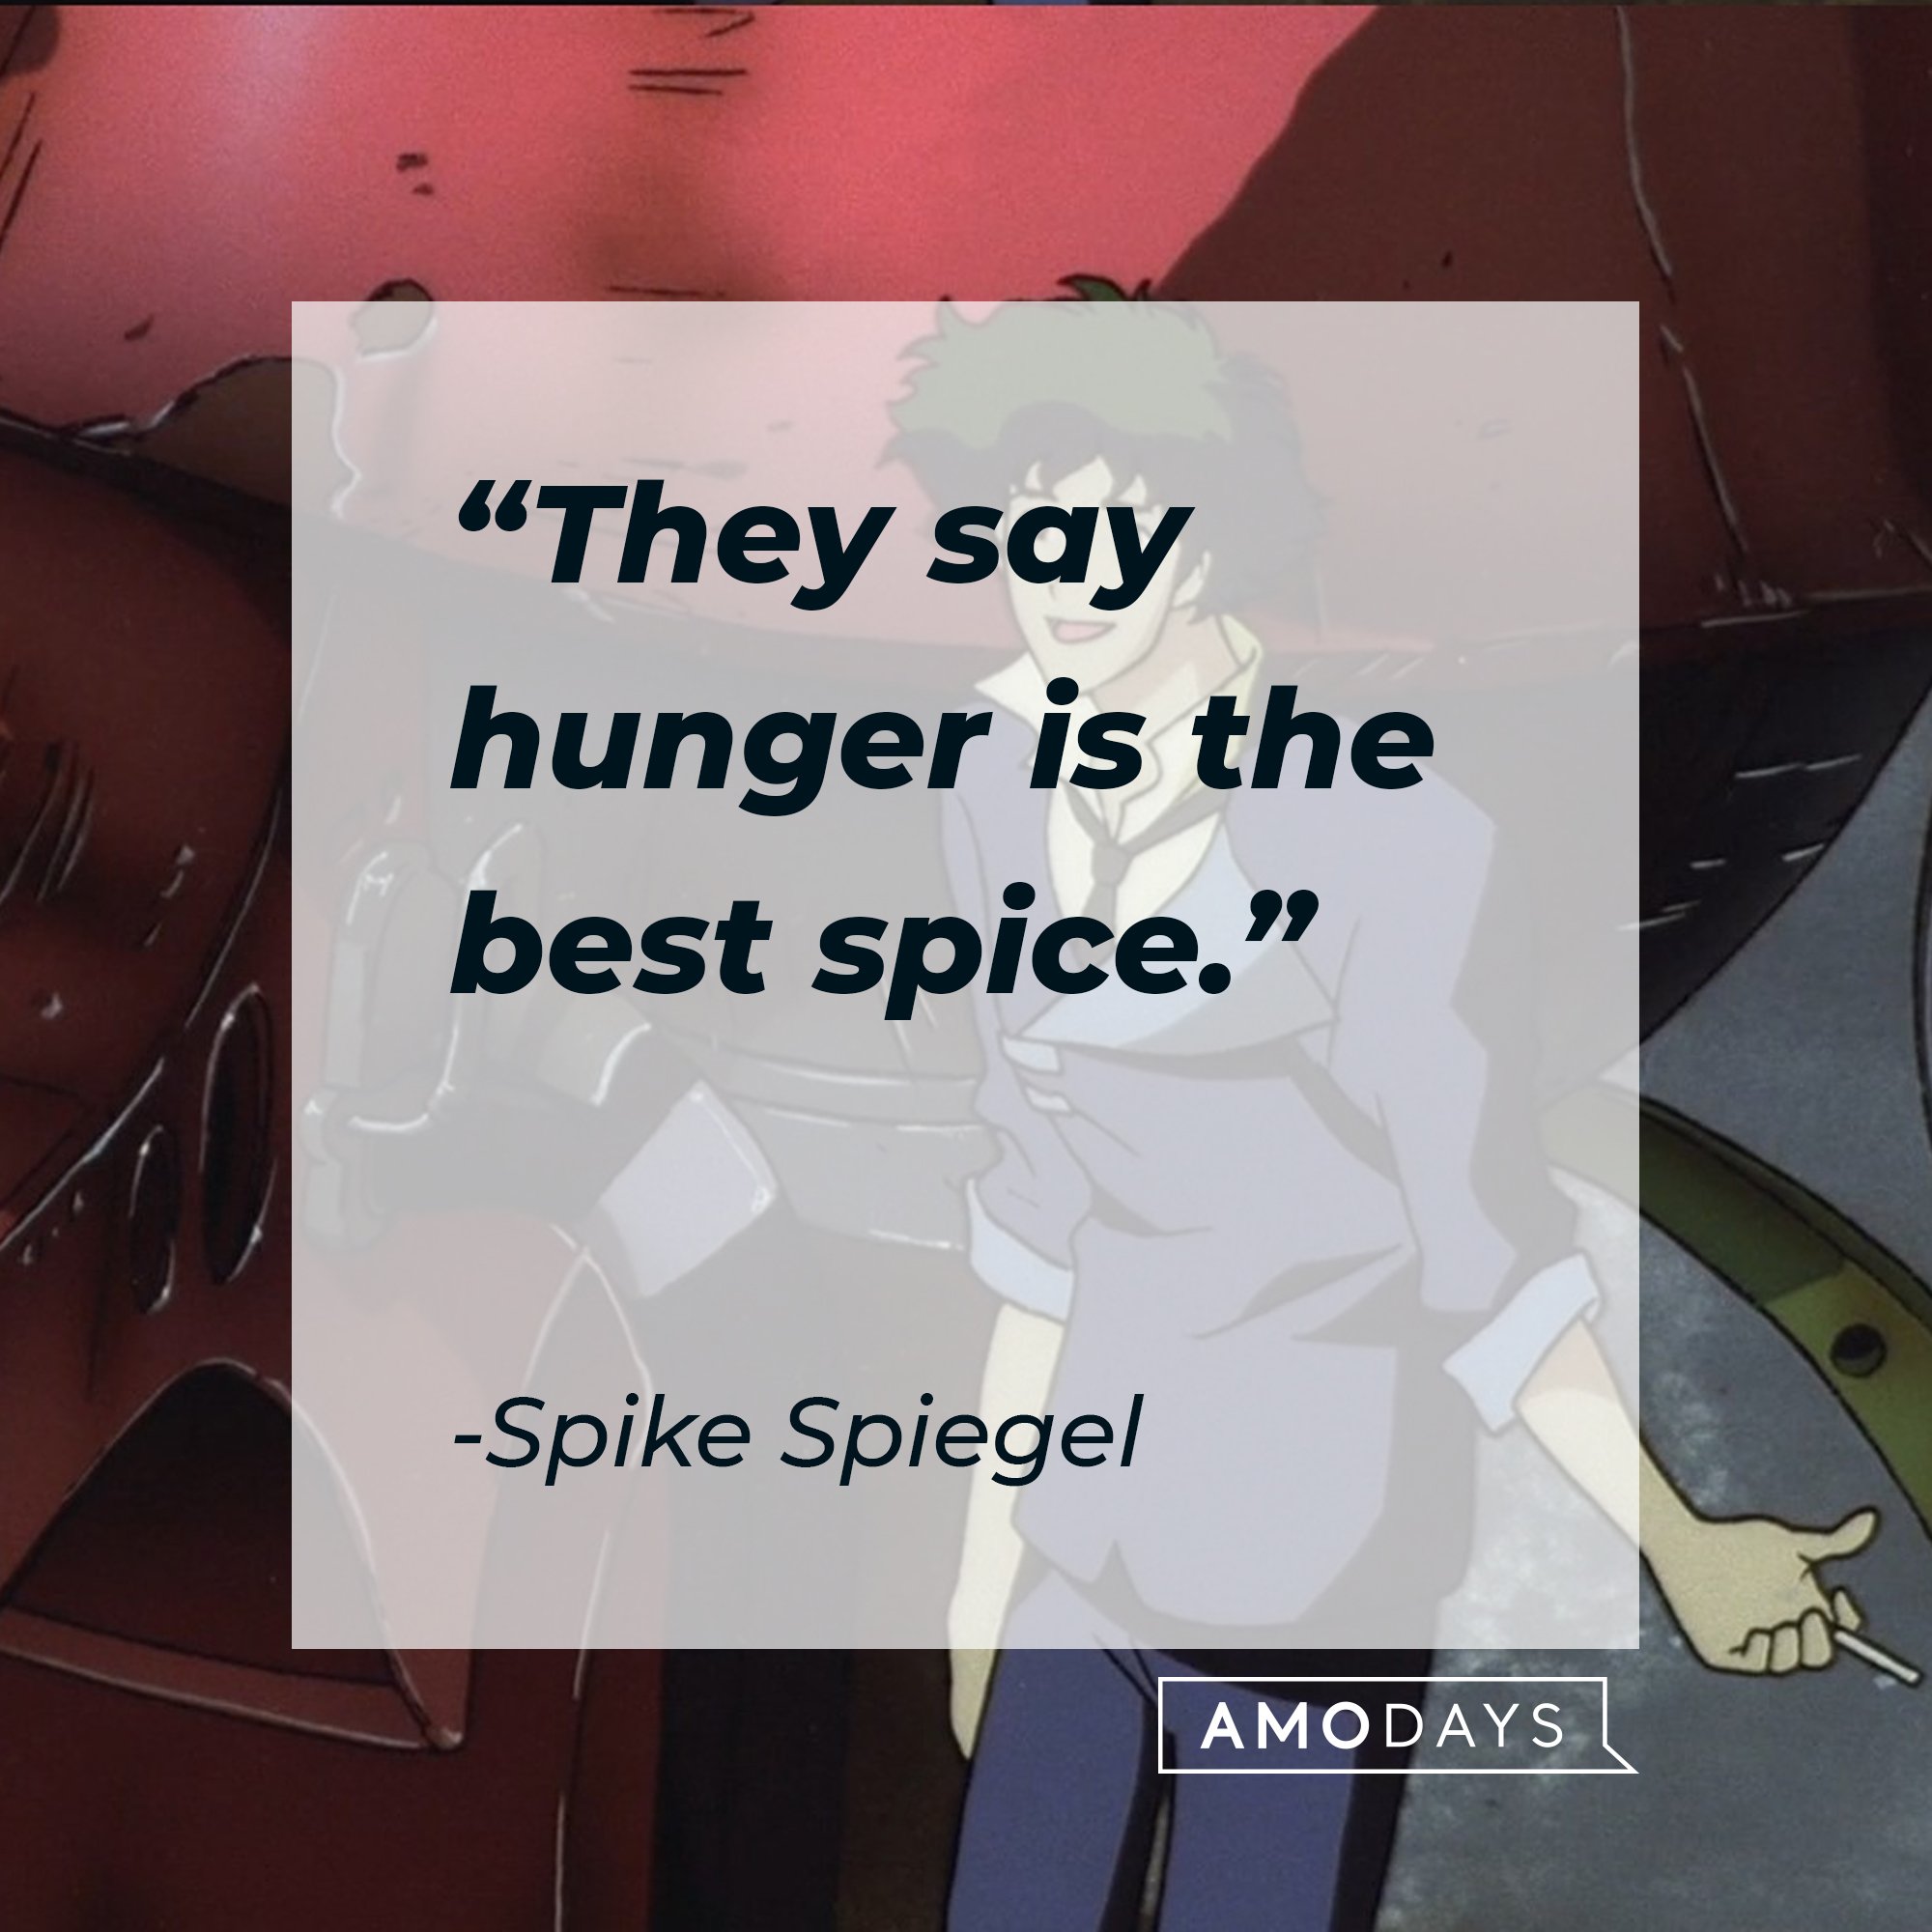 Spike Spiegel's quote: "They say hunger is the best spice." | Image: AmoDays 